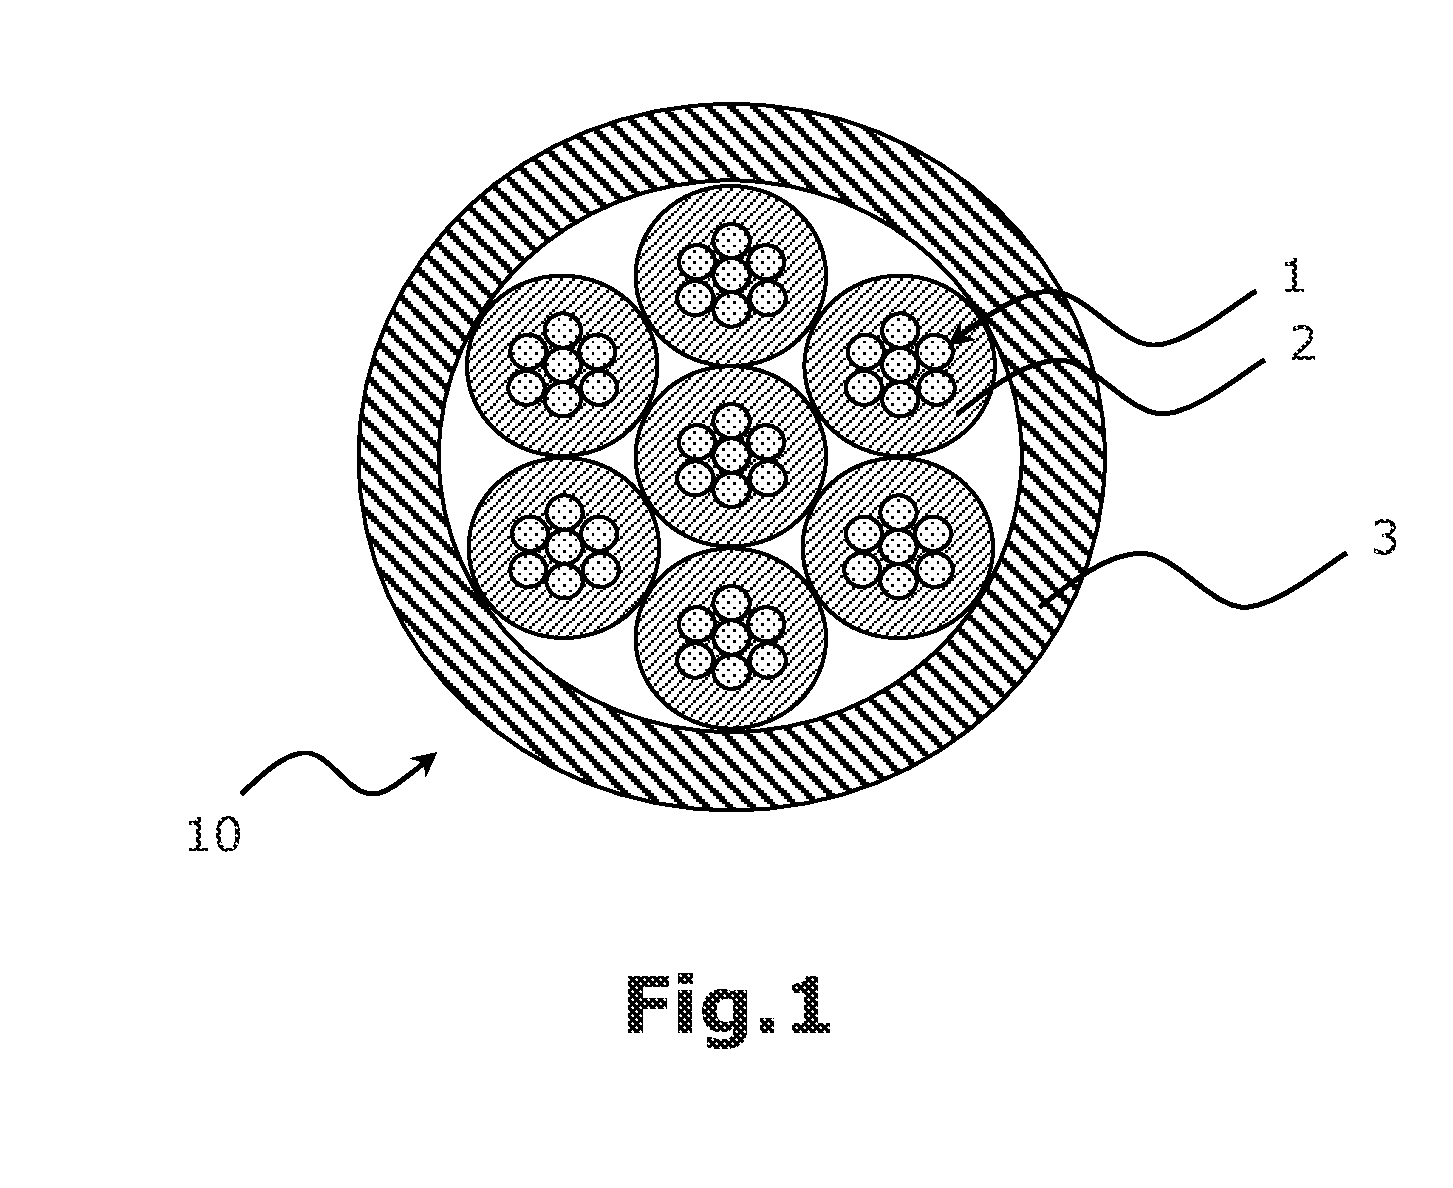 Polymer resin composition for preparing insulating material having reinforced thermal stability